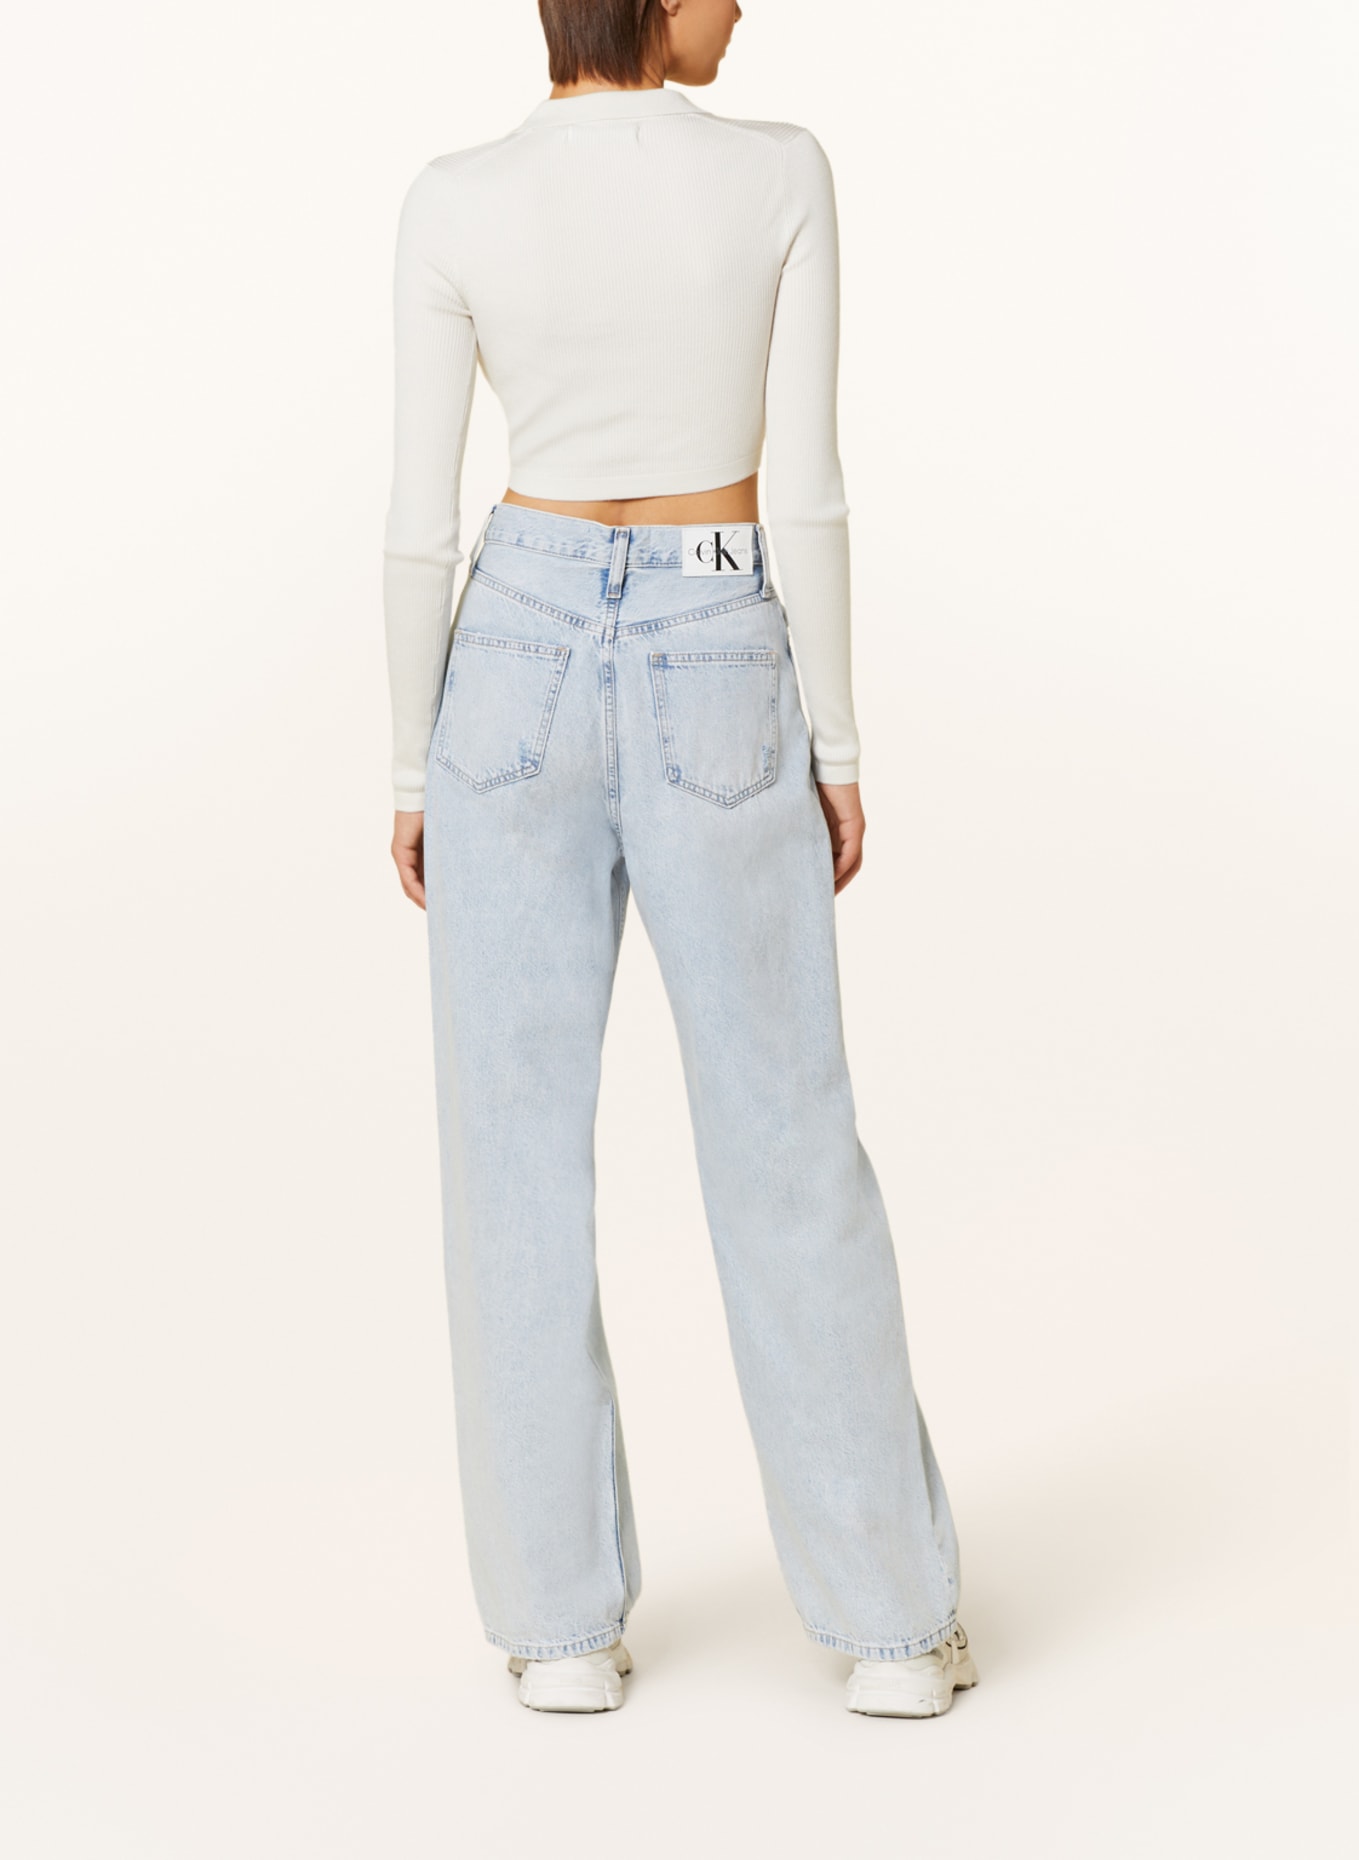 Calvin Klein Jeans Cropped sweater, Color: ECRU (Image 3)